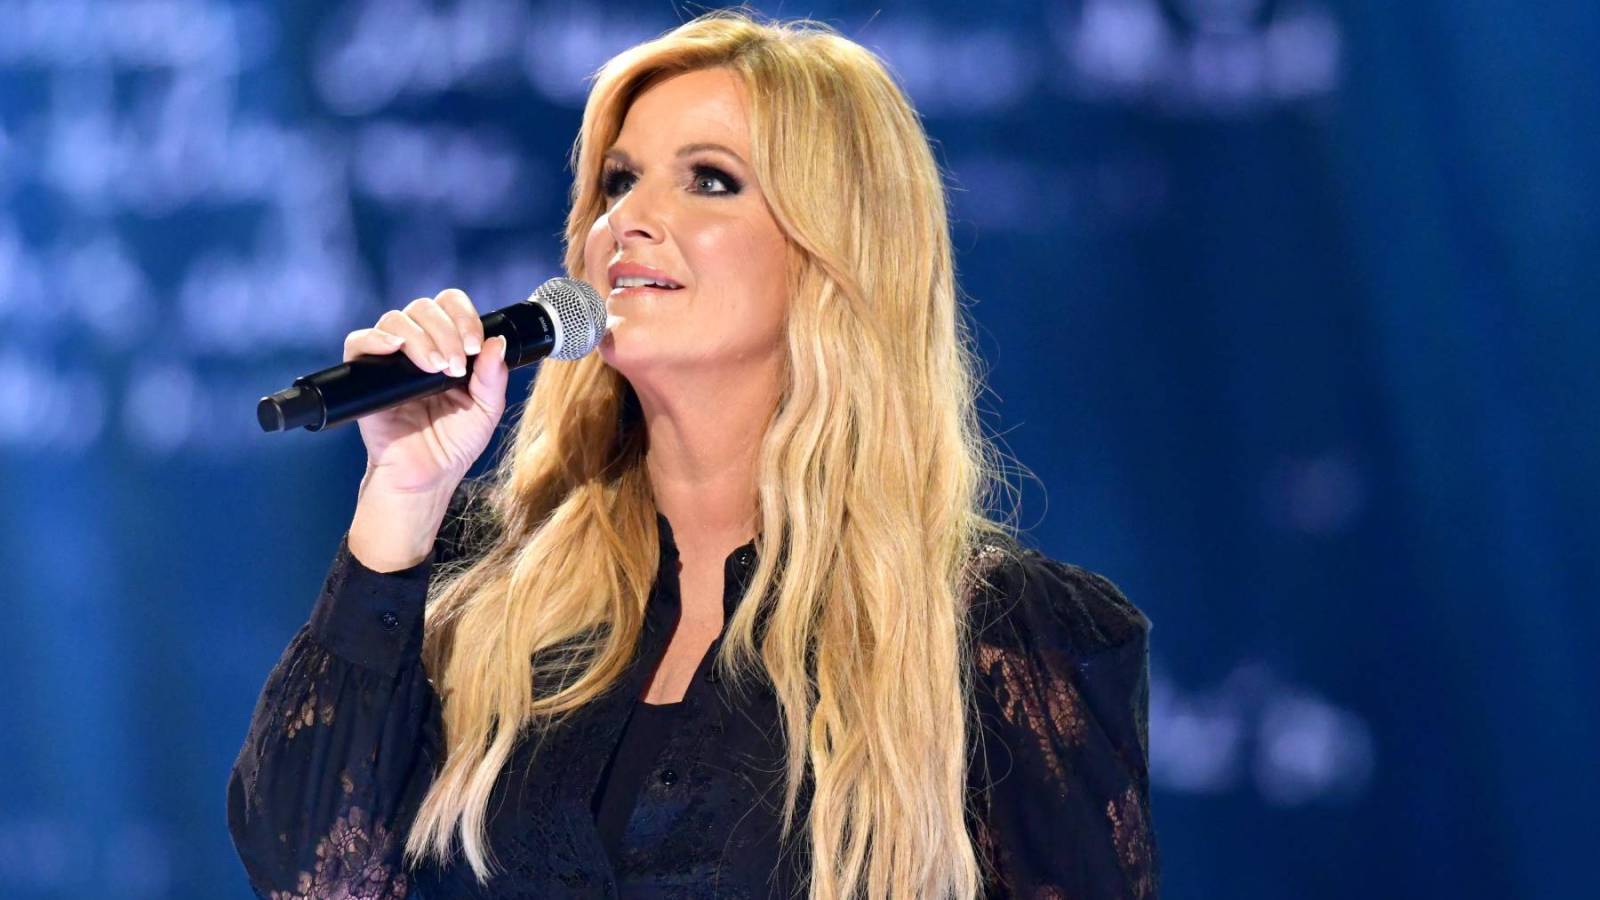 Trisha Yearwood's 'Put It in a Song' Is a Classic